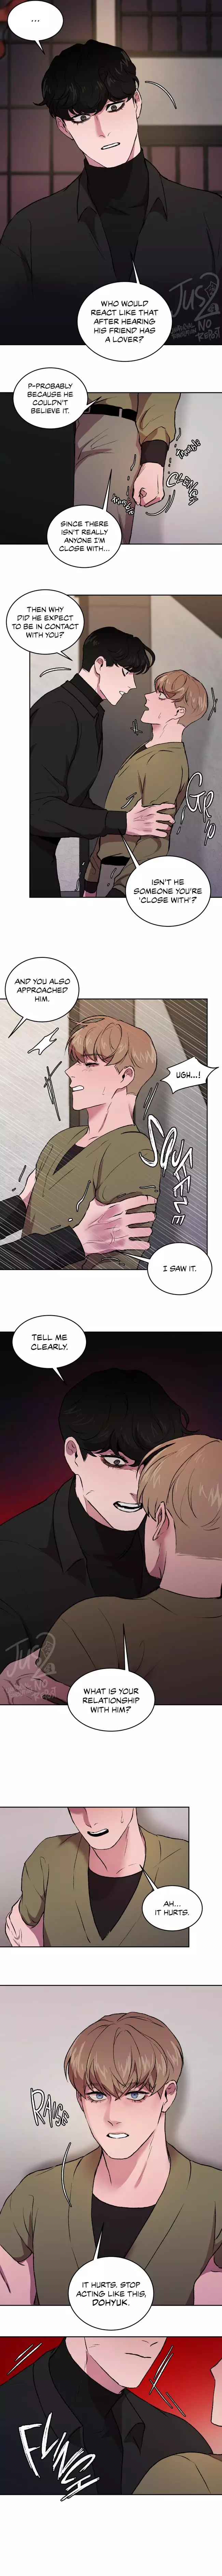 Hwanyoung's Misery - 3 page 6-4eb80734